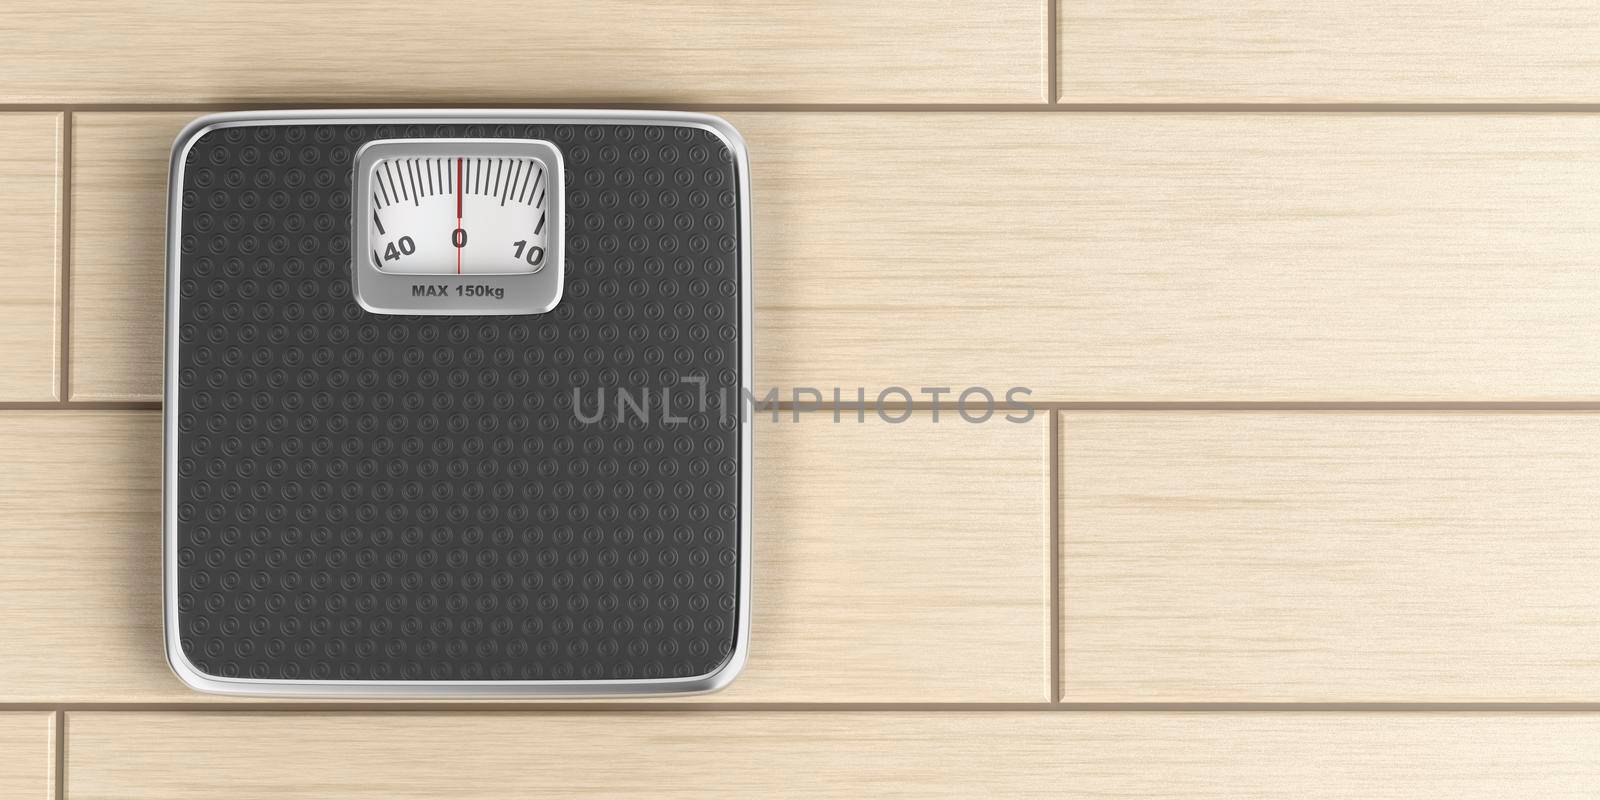 Analog weight scale by magraphics